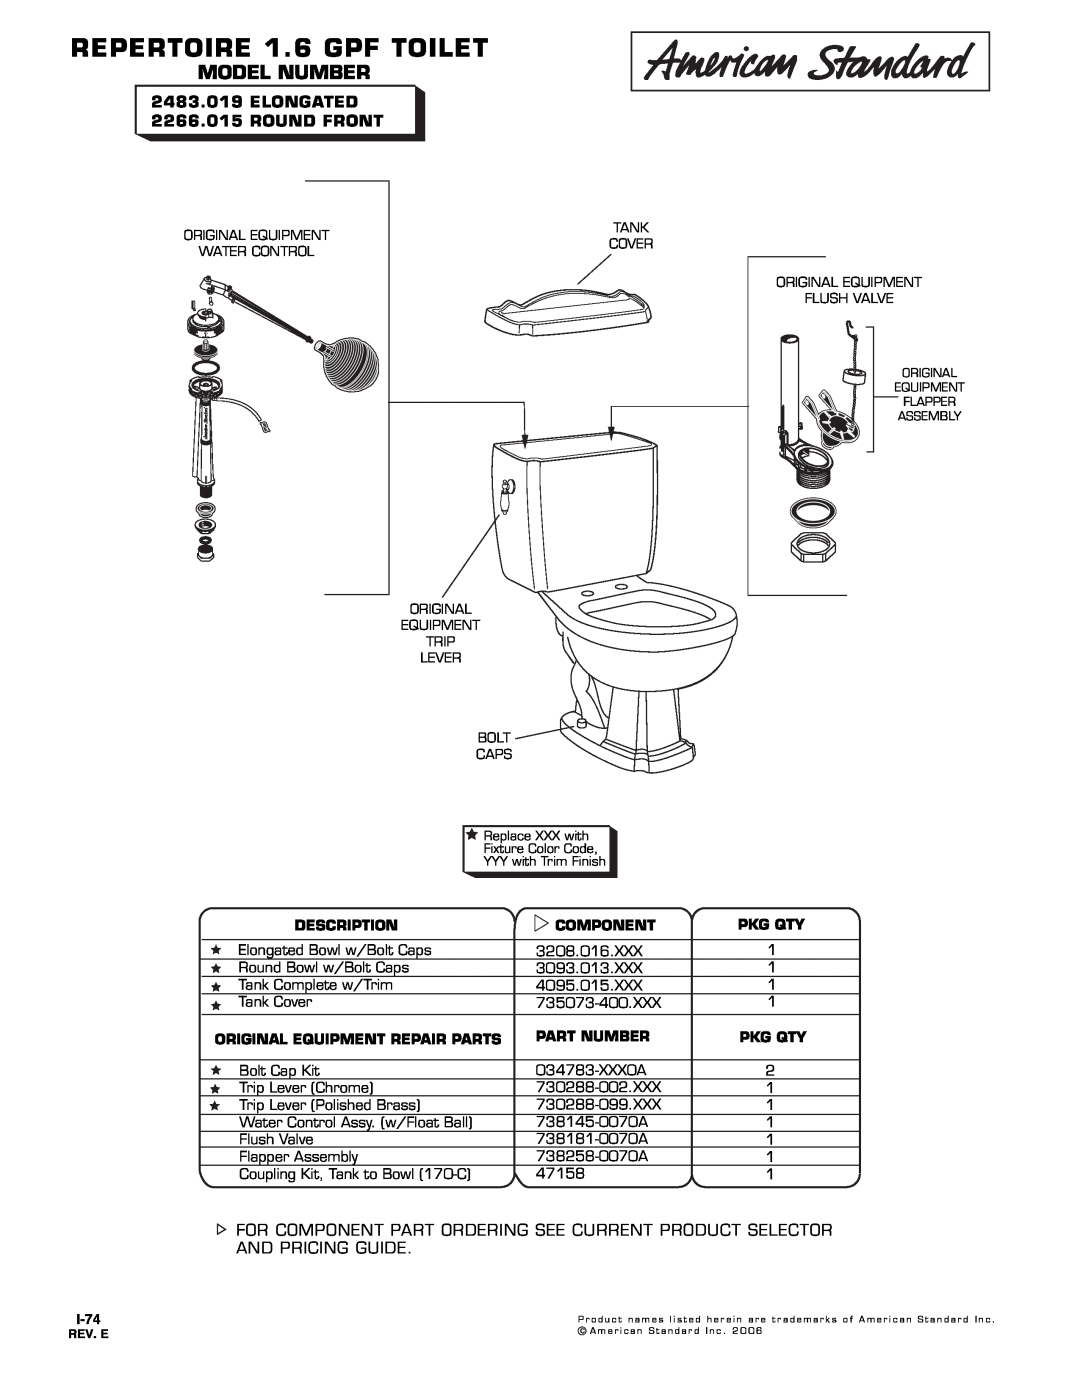 American Standard 2483.019 Elongated manual REPERTOIRE 1.6 GPF TOILET, Model Number, ELONGATED 2266.015 ROUND FRONT, I-74 